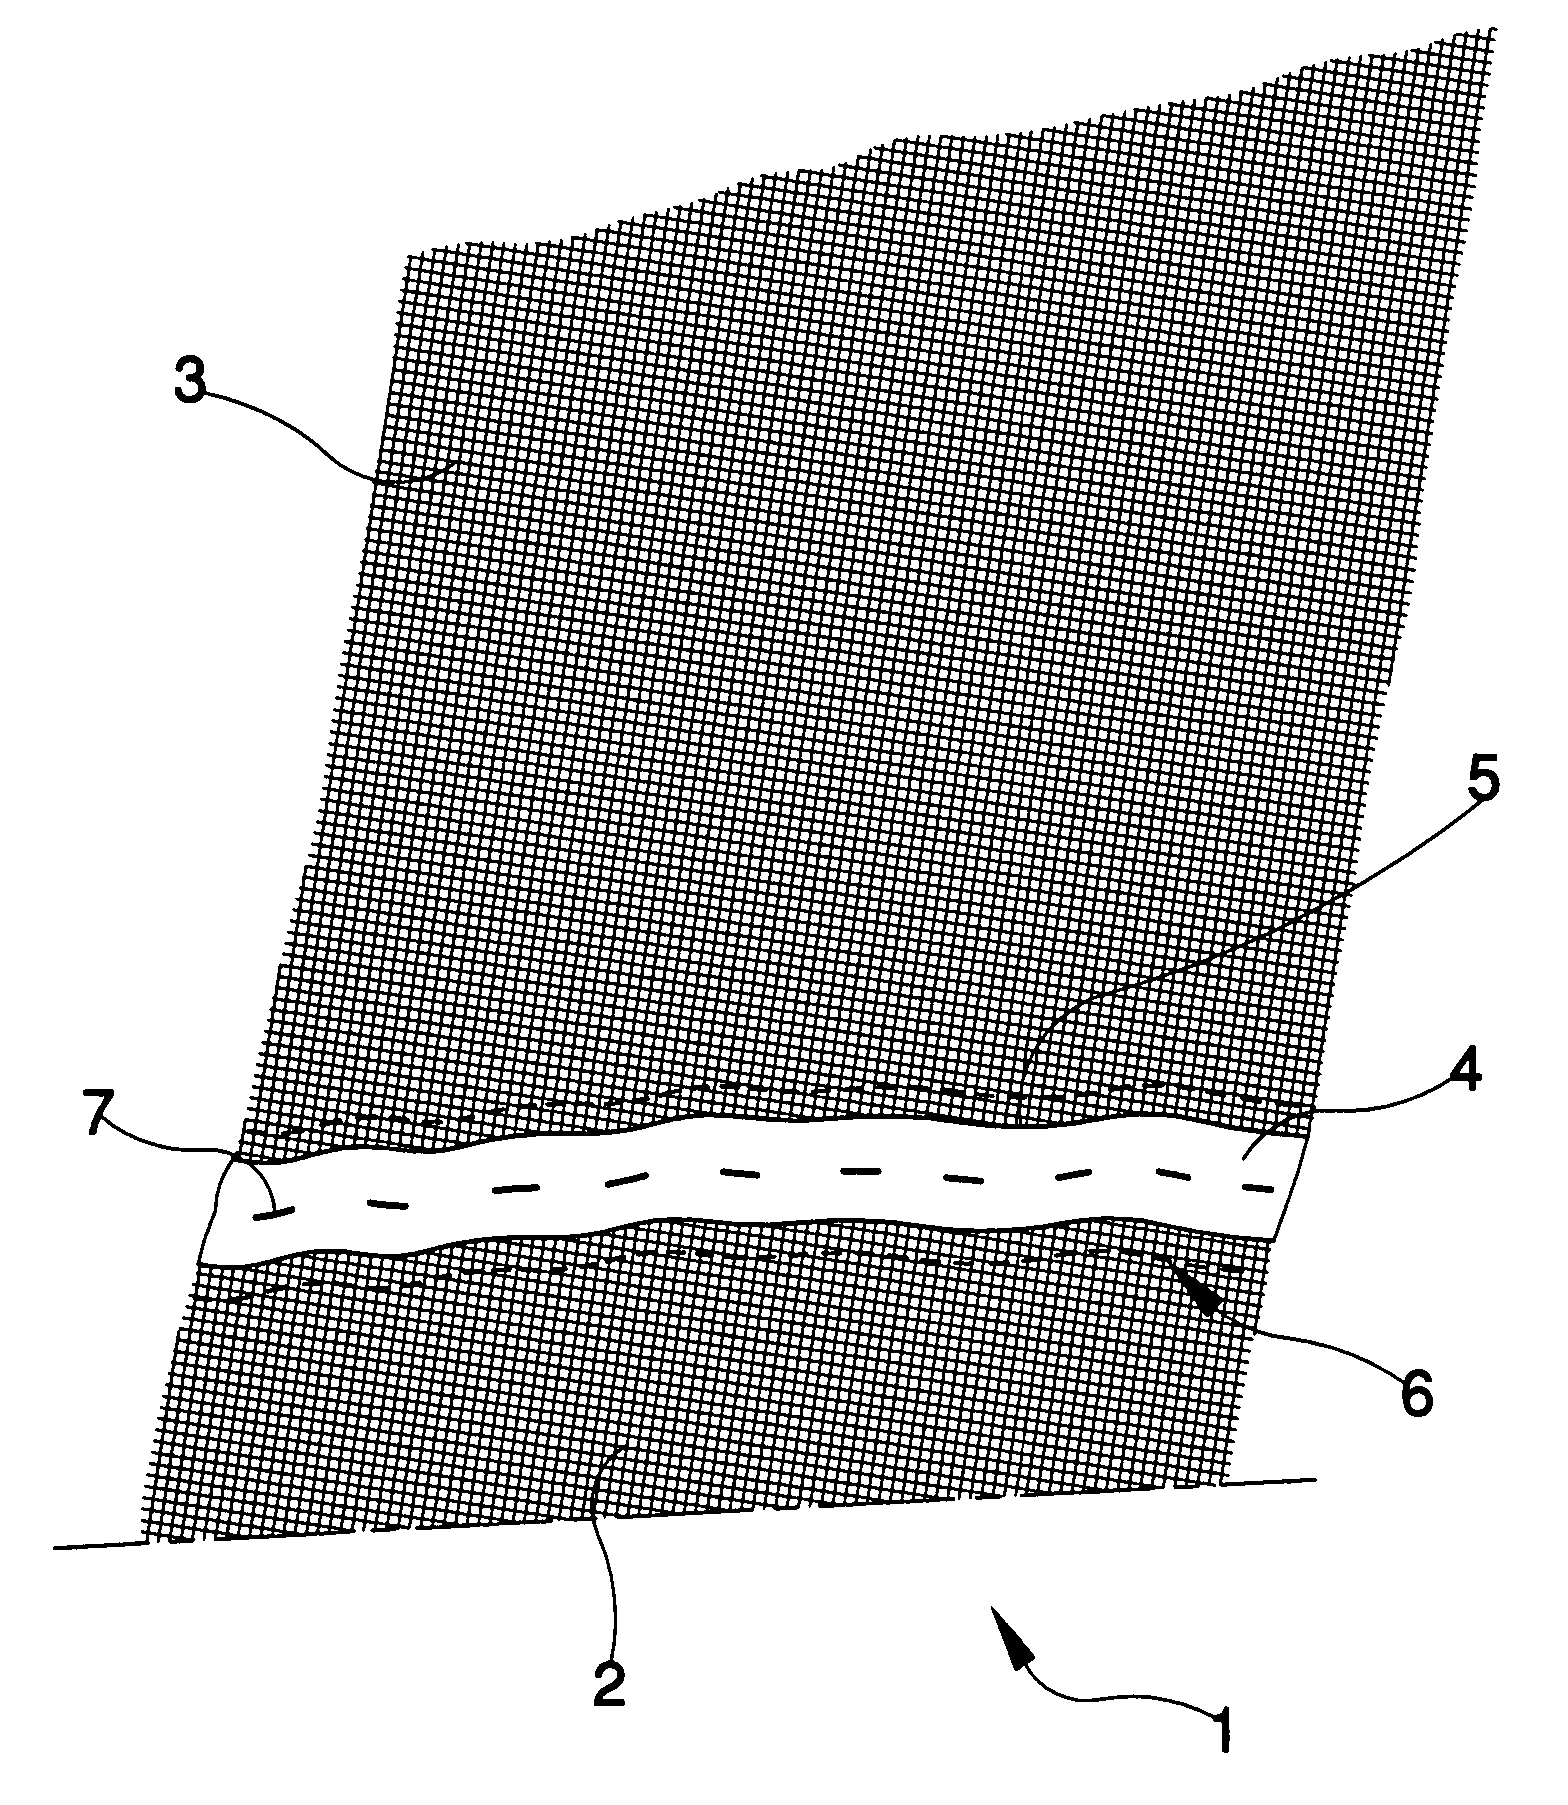 Surgical dressing with identification counterfoil